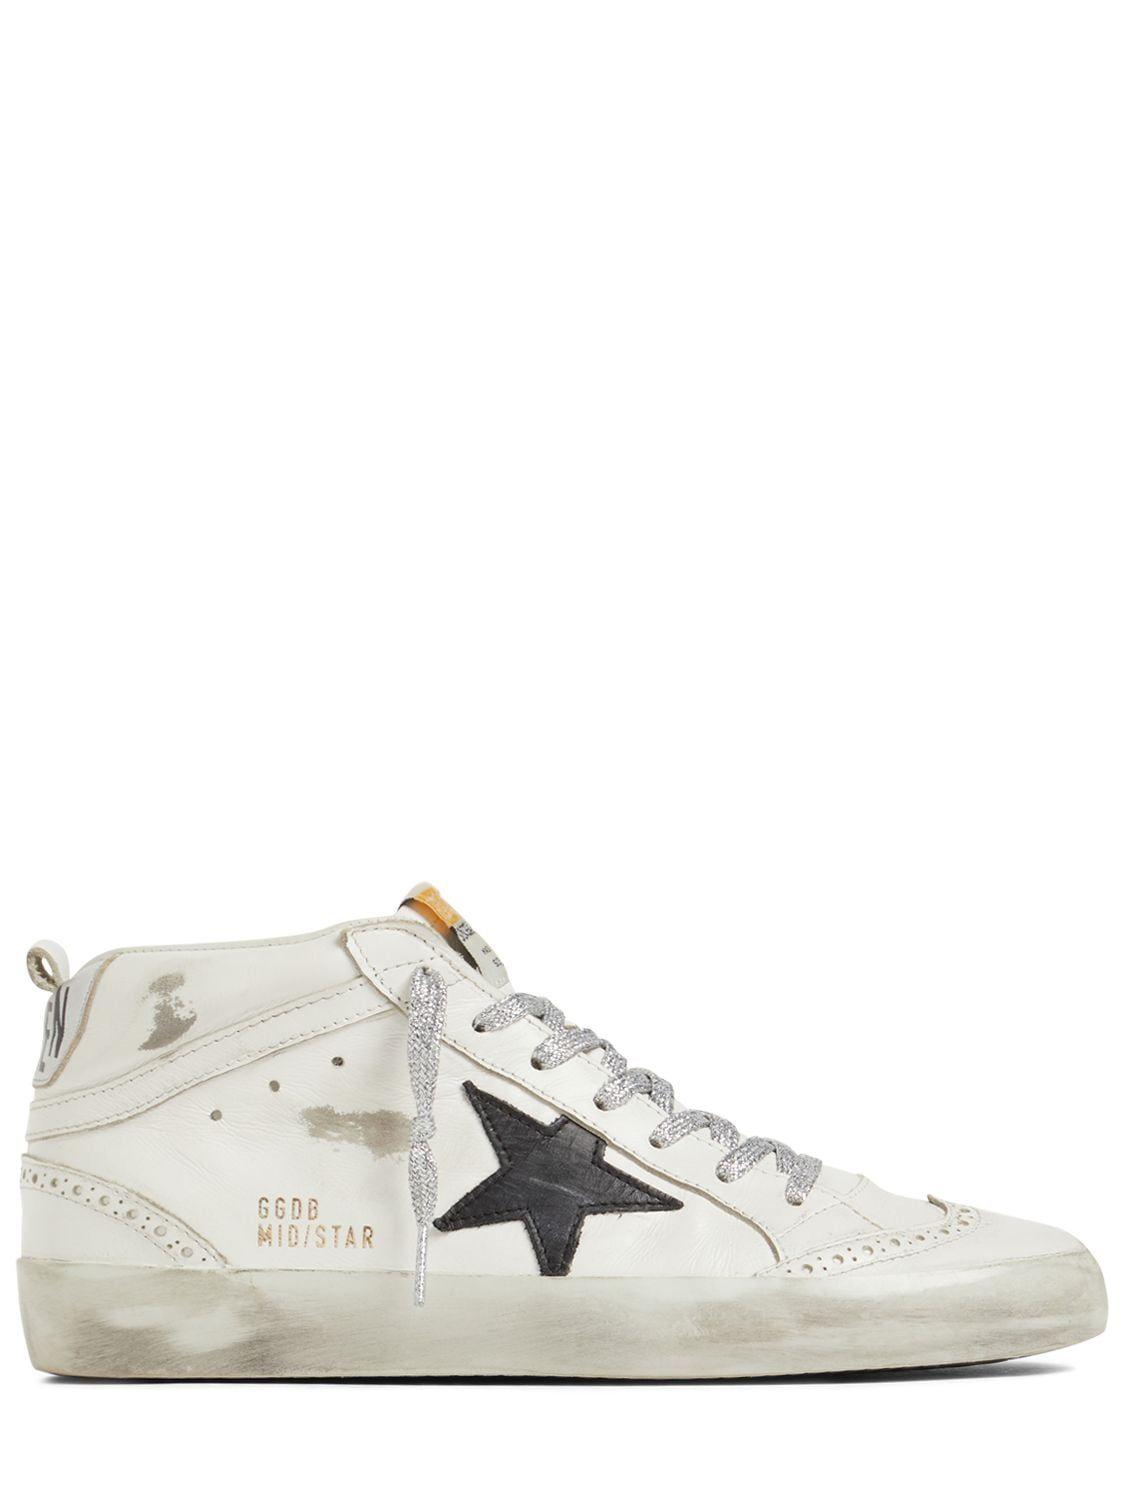 Golden Goose 20mm Mid Star Leather Sneakers in White | Lyst